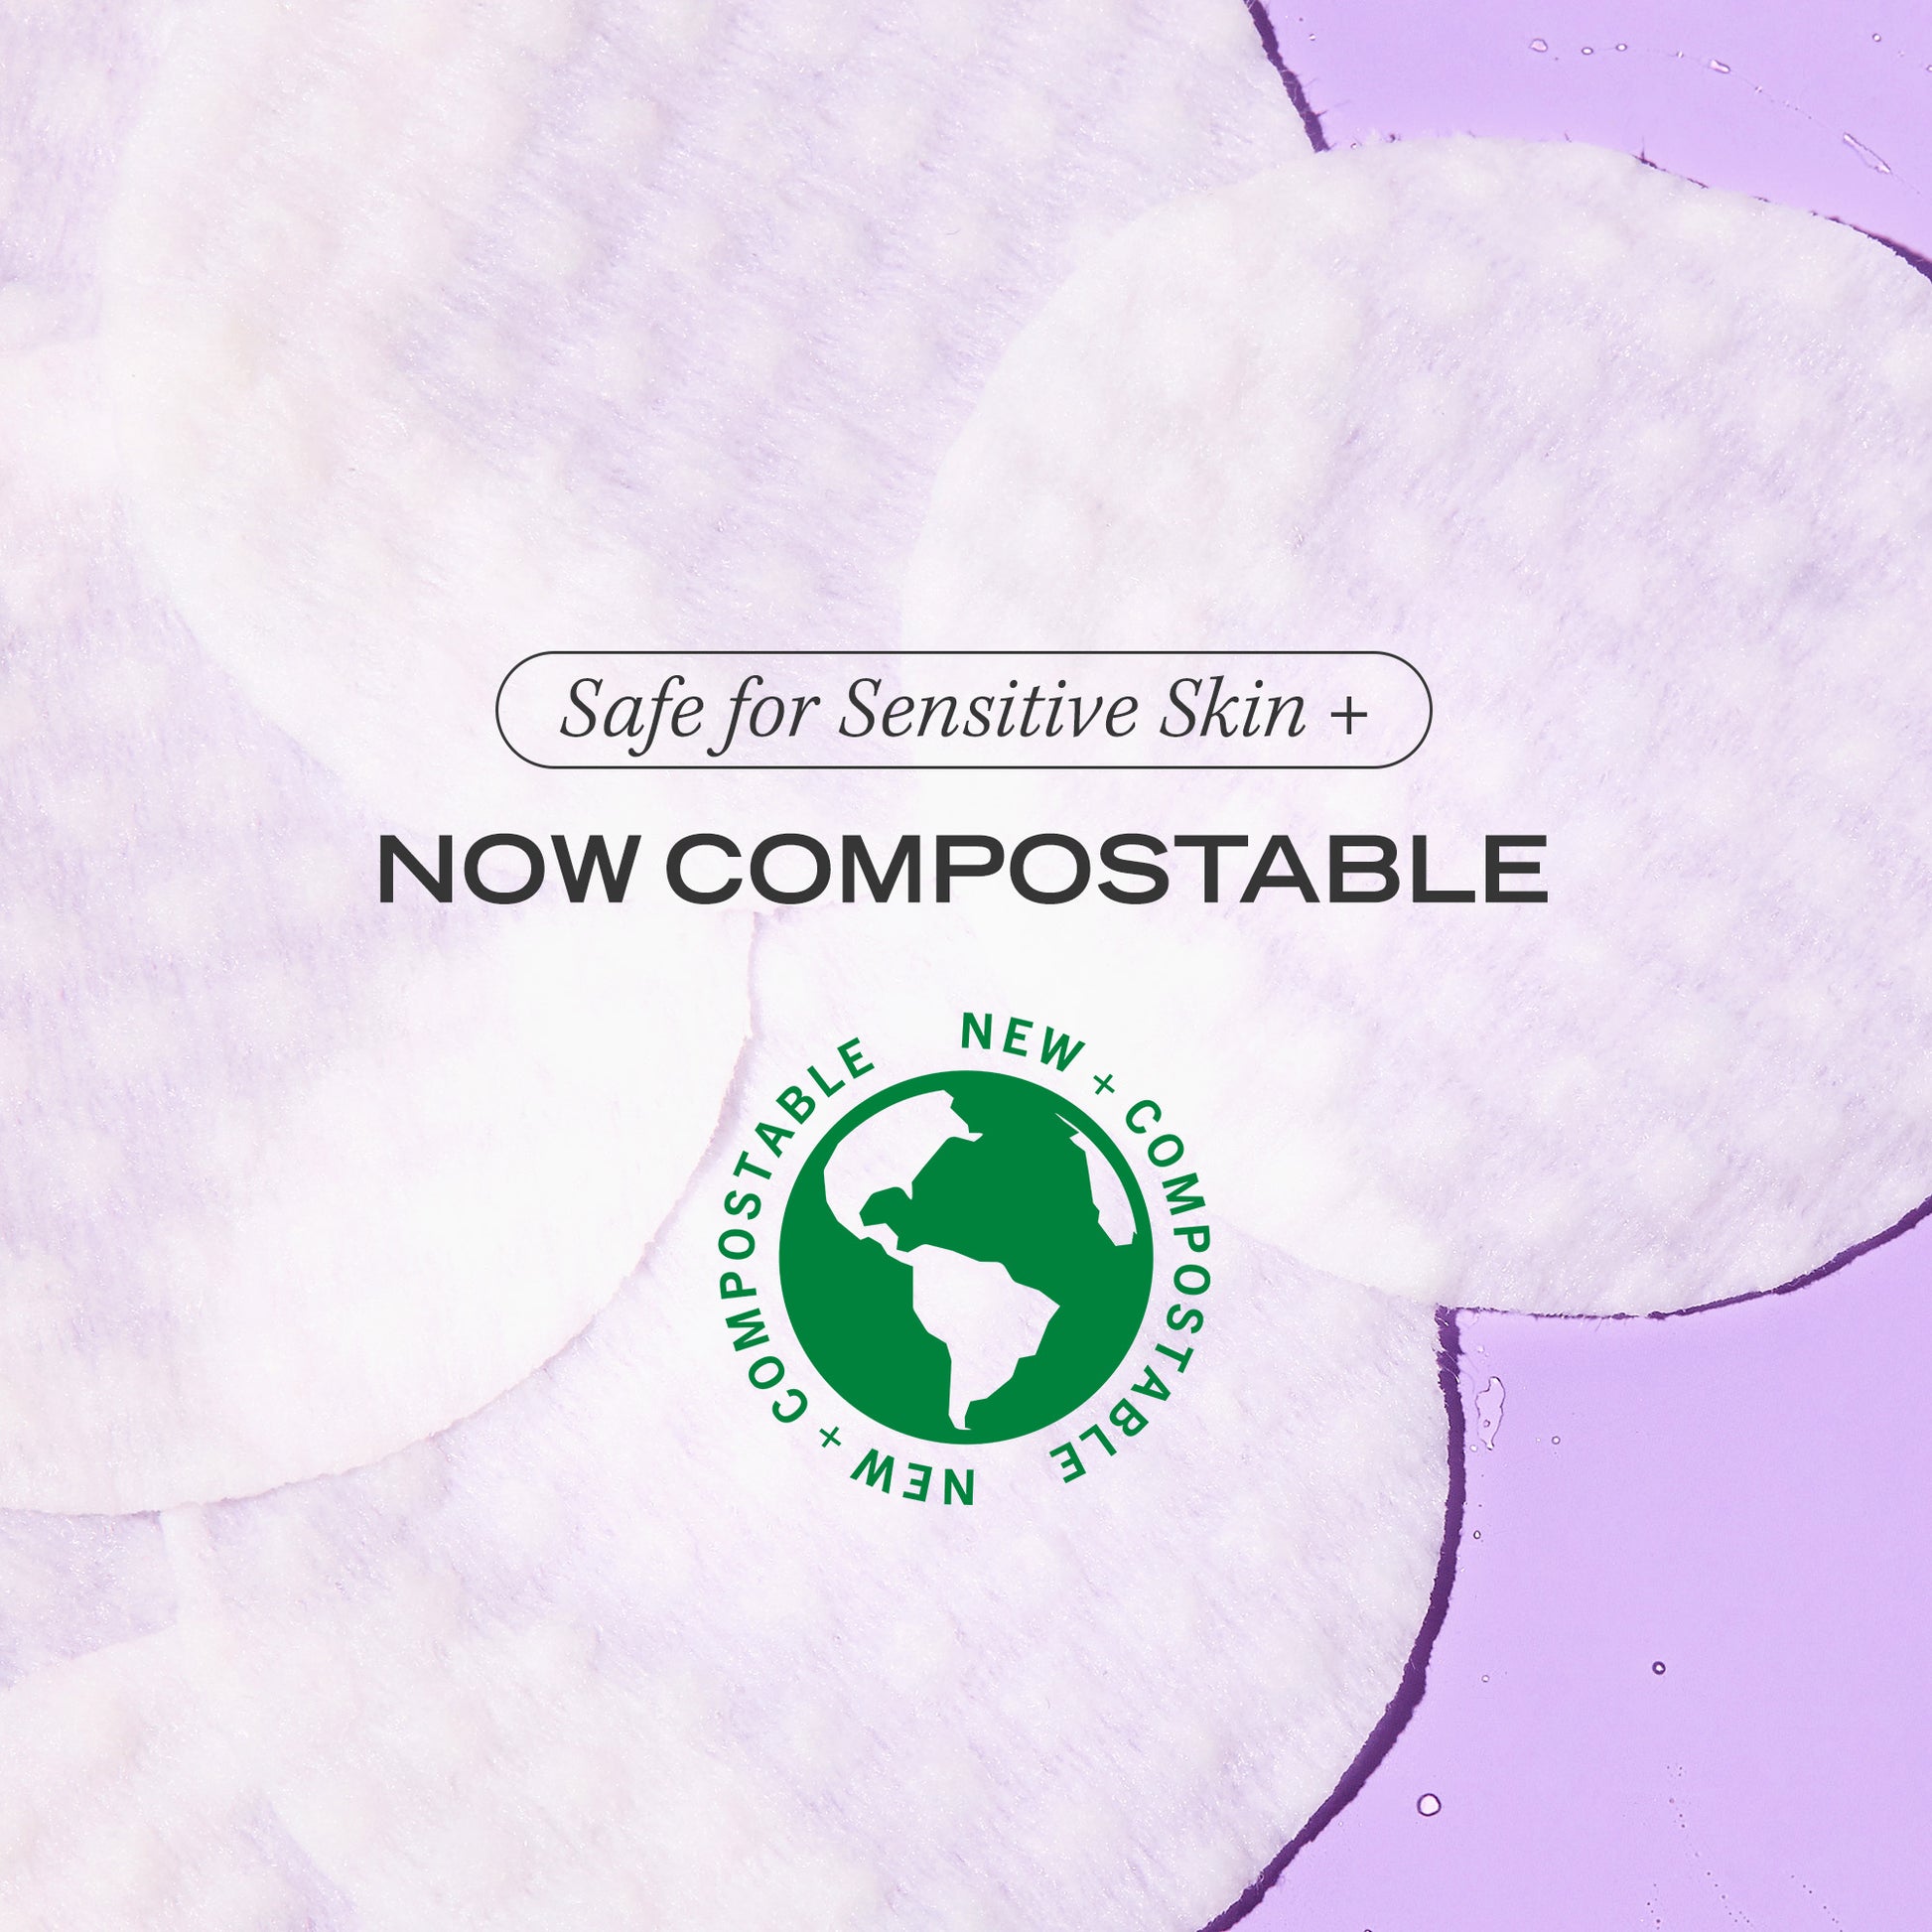 Texture of pads. Safe for Sensitive Skin + Now Compostable